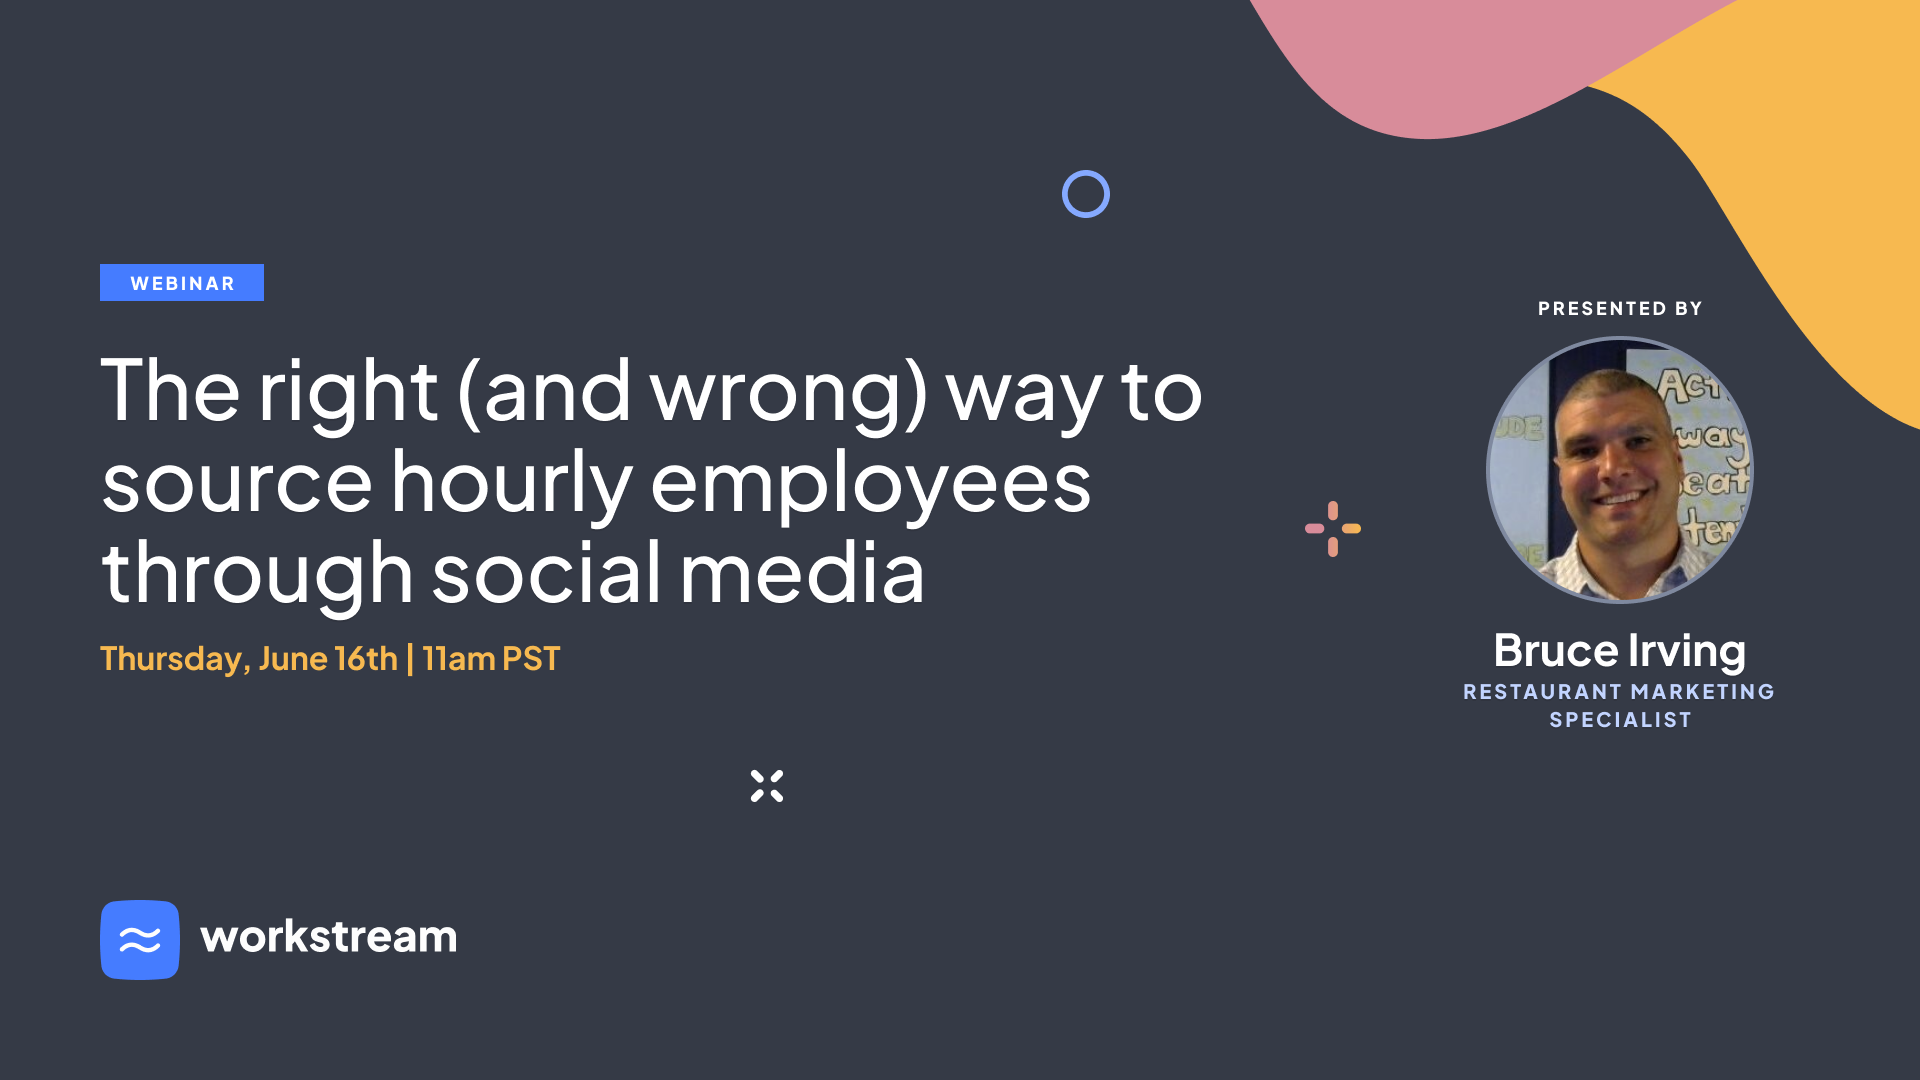 The right (and wrong) way to source hourly employees through social media w/ Bruce Irving